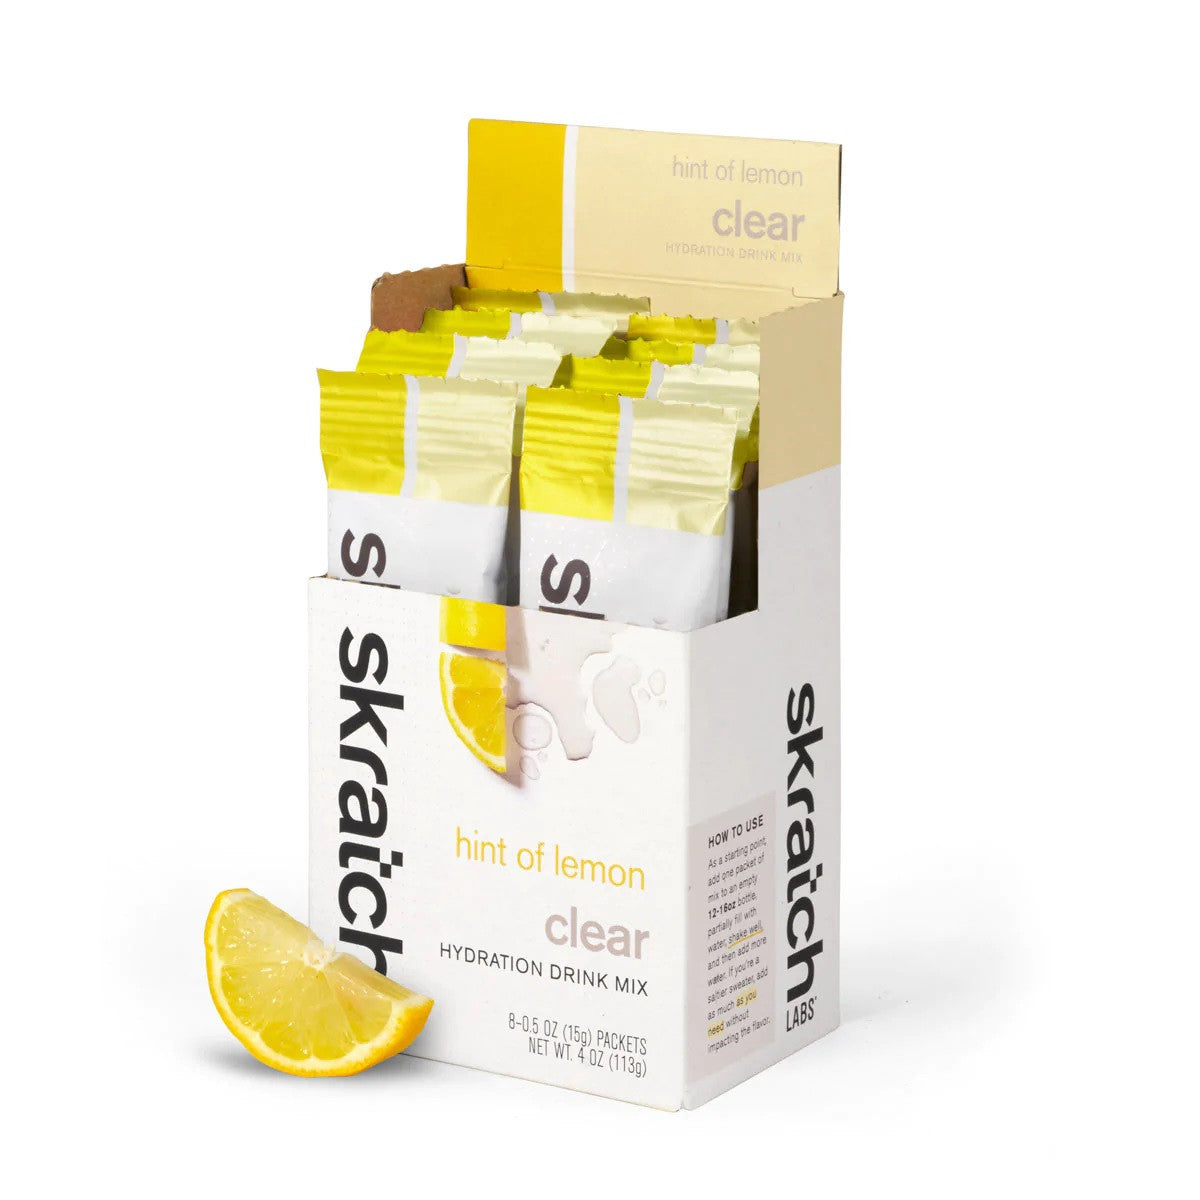 SKRATCH LABS - CLEAR DRINK MIX HINT OF LEMON SINGLE SERVING